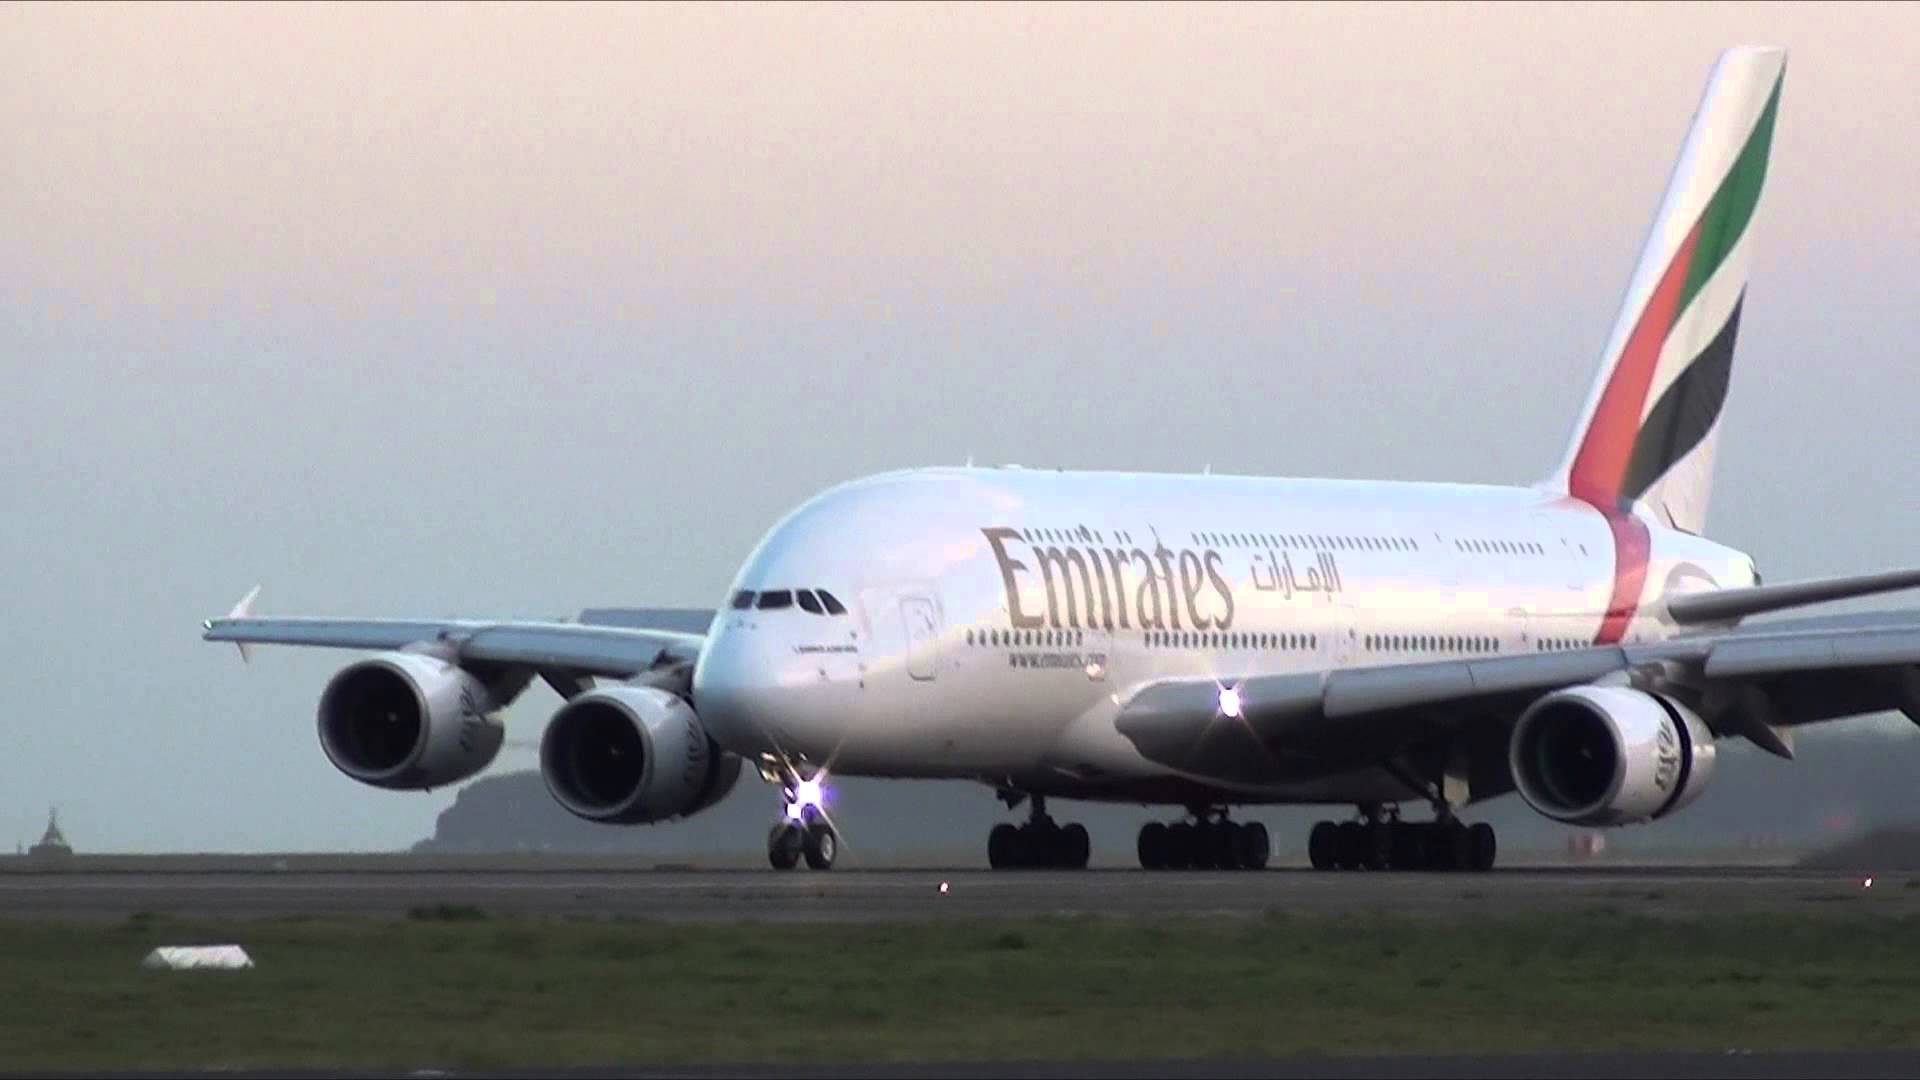 Emirates Airlines A380 800 [A6 EDN] Night Landing On 34L Runway